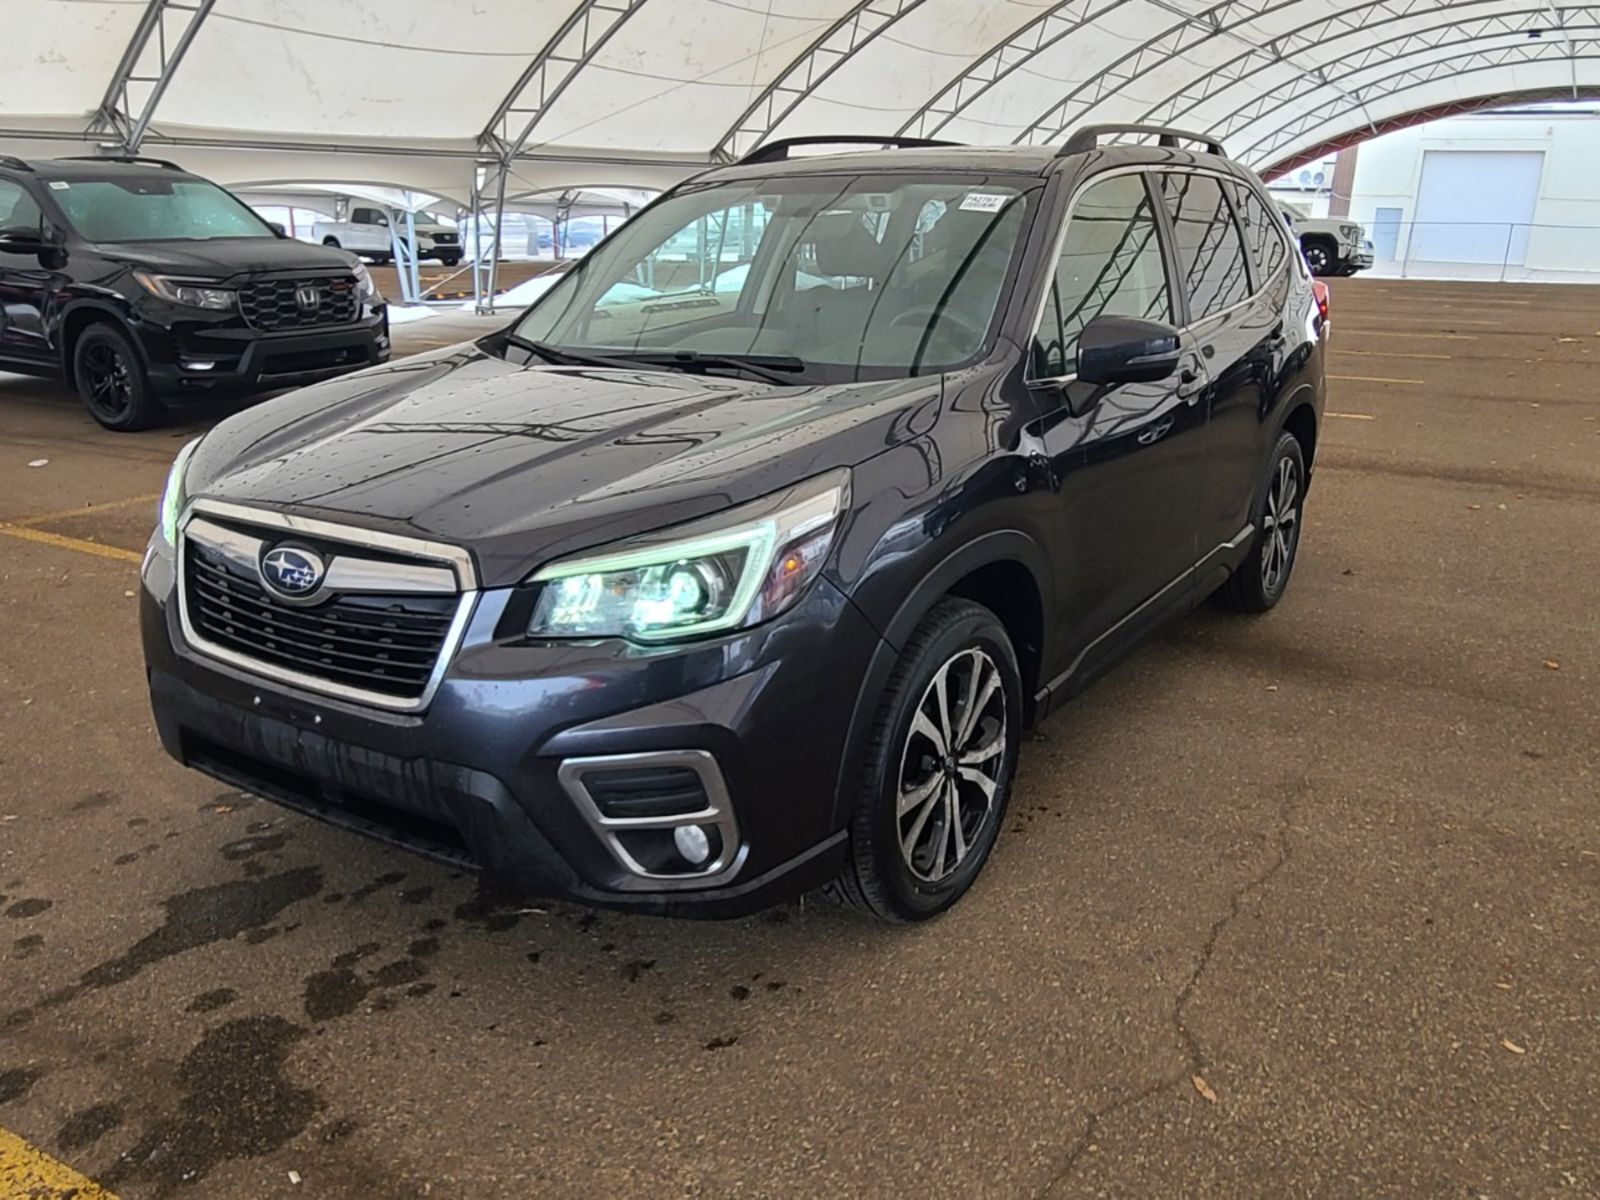 2019 Subaru Forester No Reported Accidents, Leather, Heated Seats